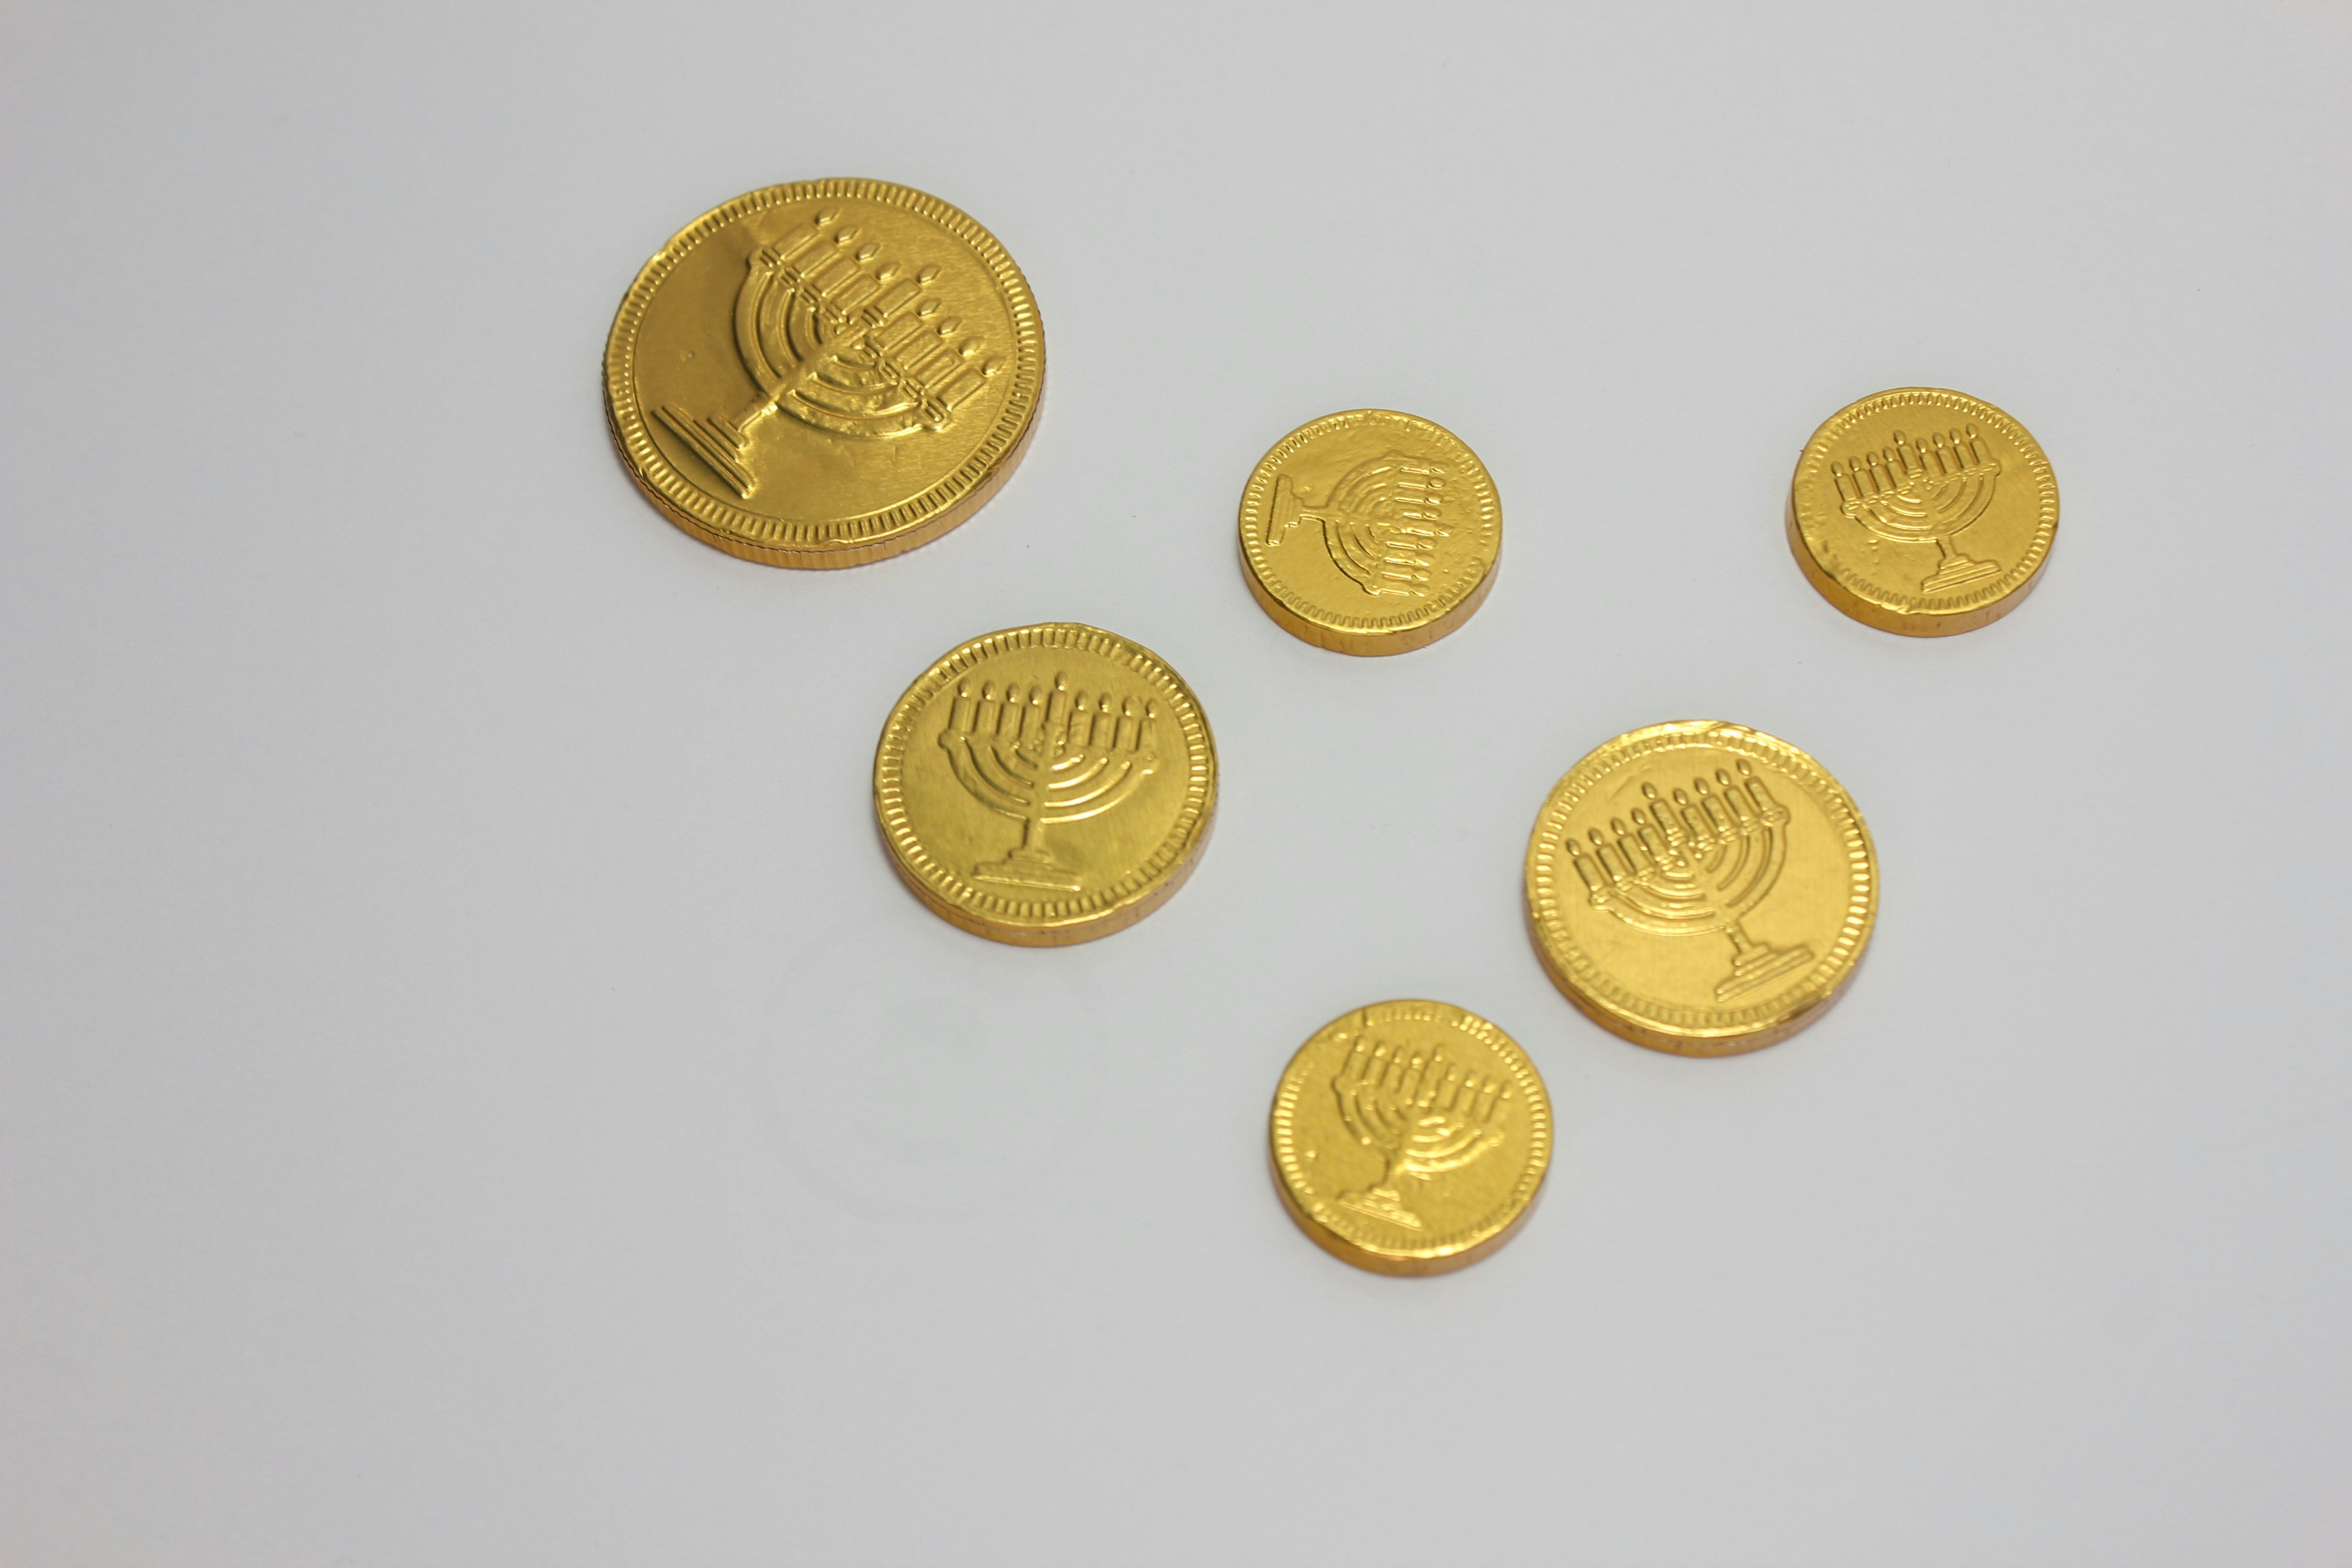 Festive Chanukah Gelt Chocolate Coins On White Background To Celebrate The Holiday Season